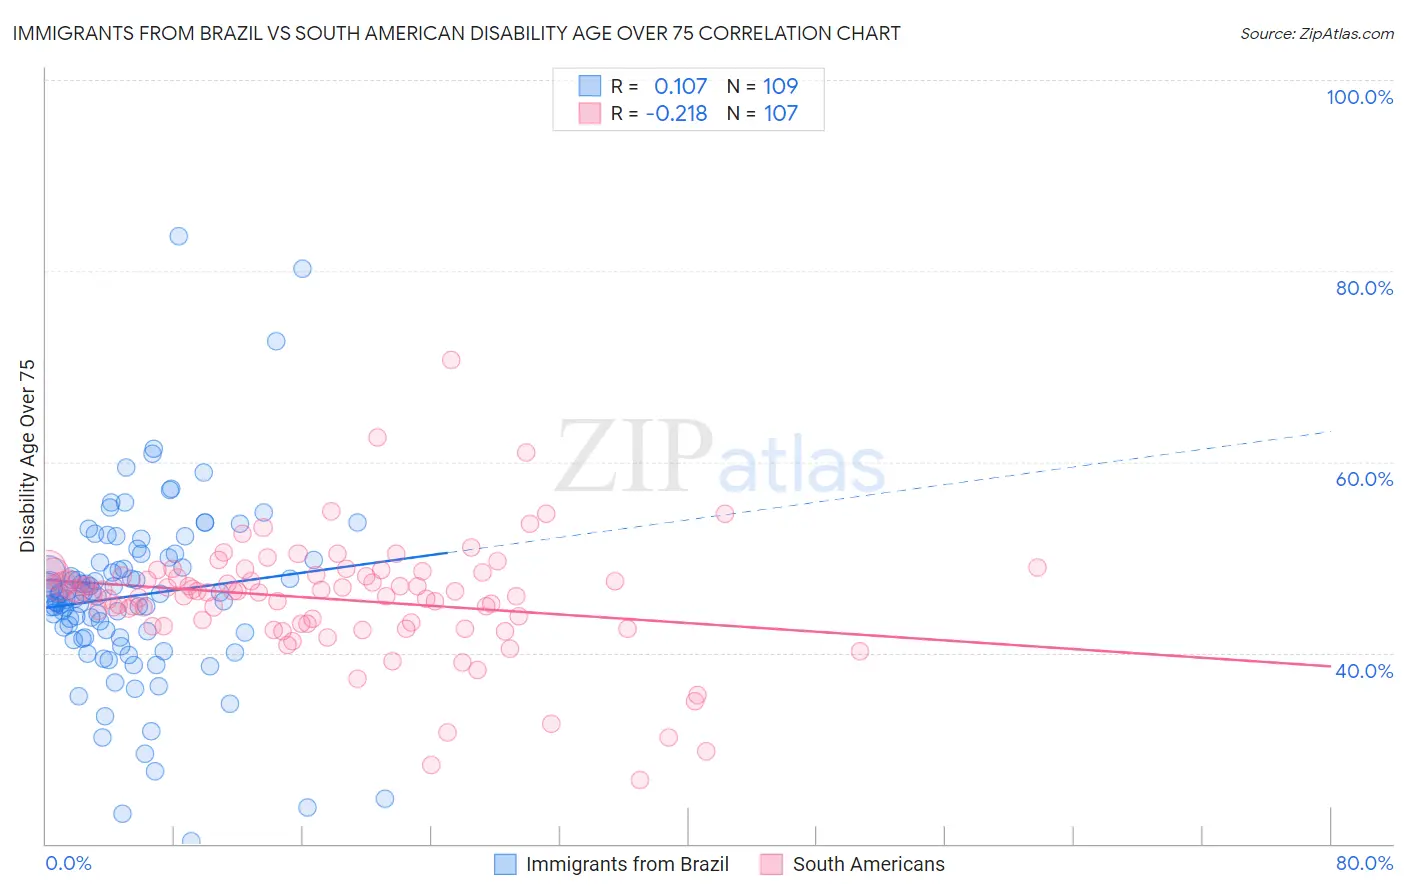 Immigrants from Brazil vs South American Disability Age Over 75